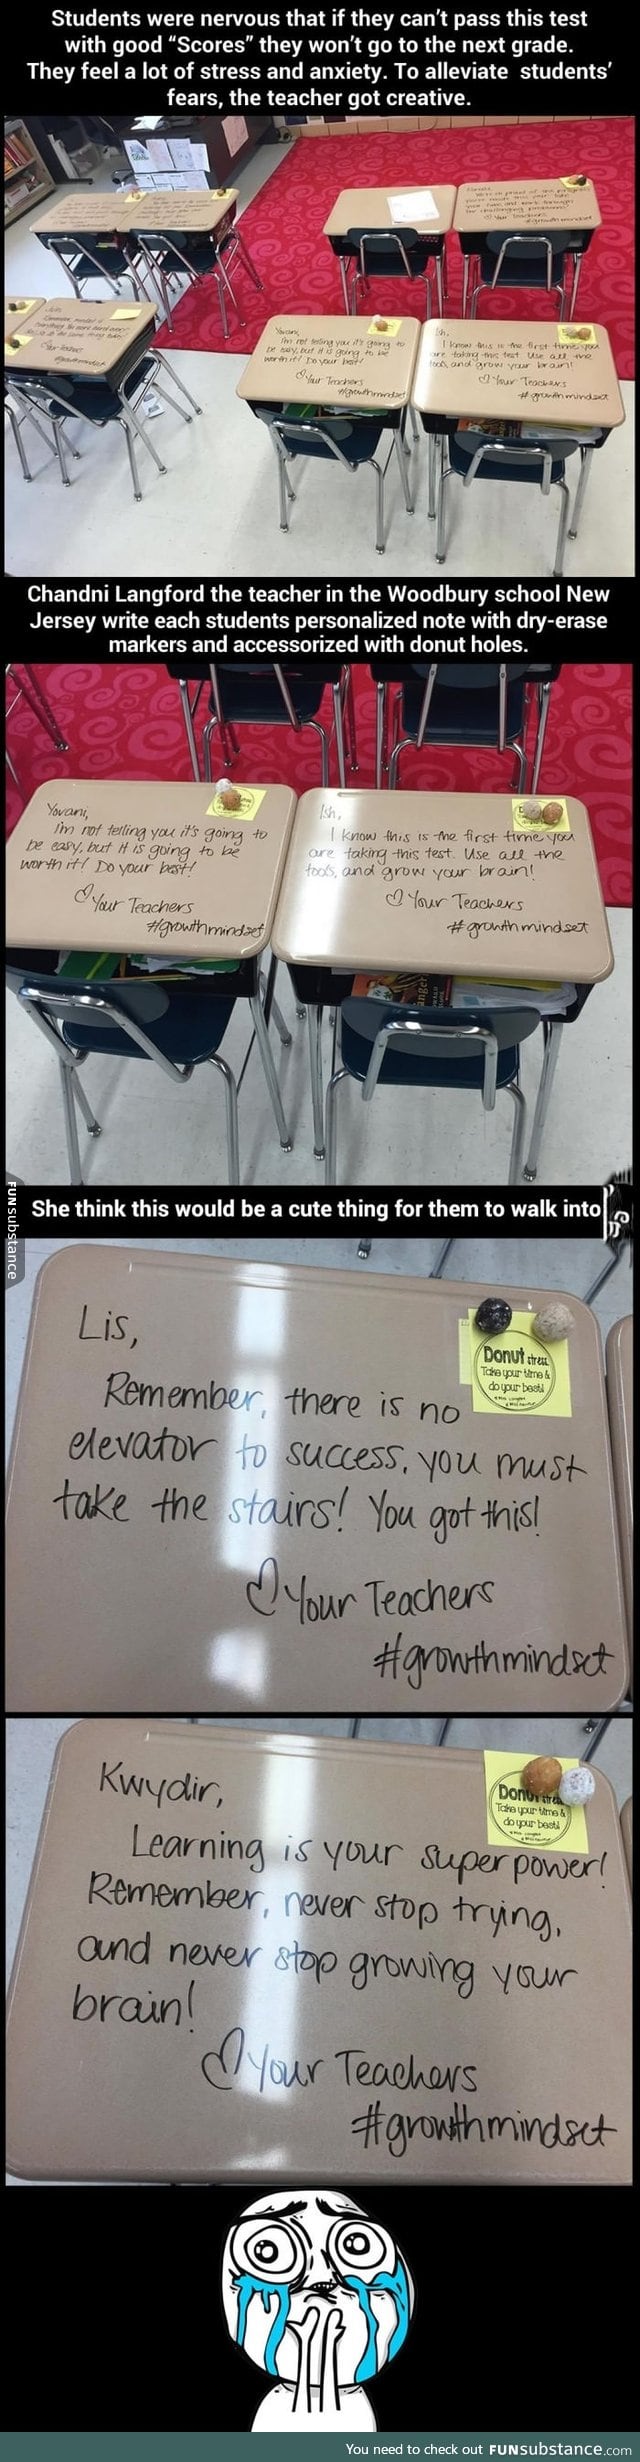 Teacher surprises students with inspiring desk messages on exam day